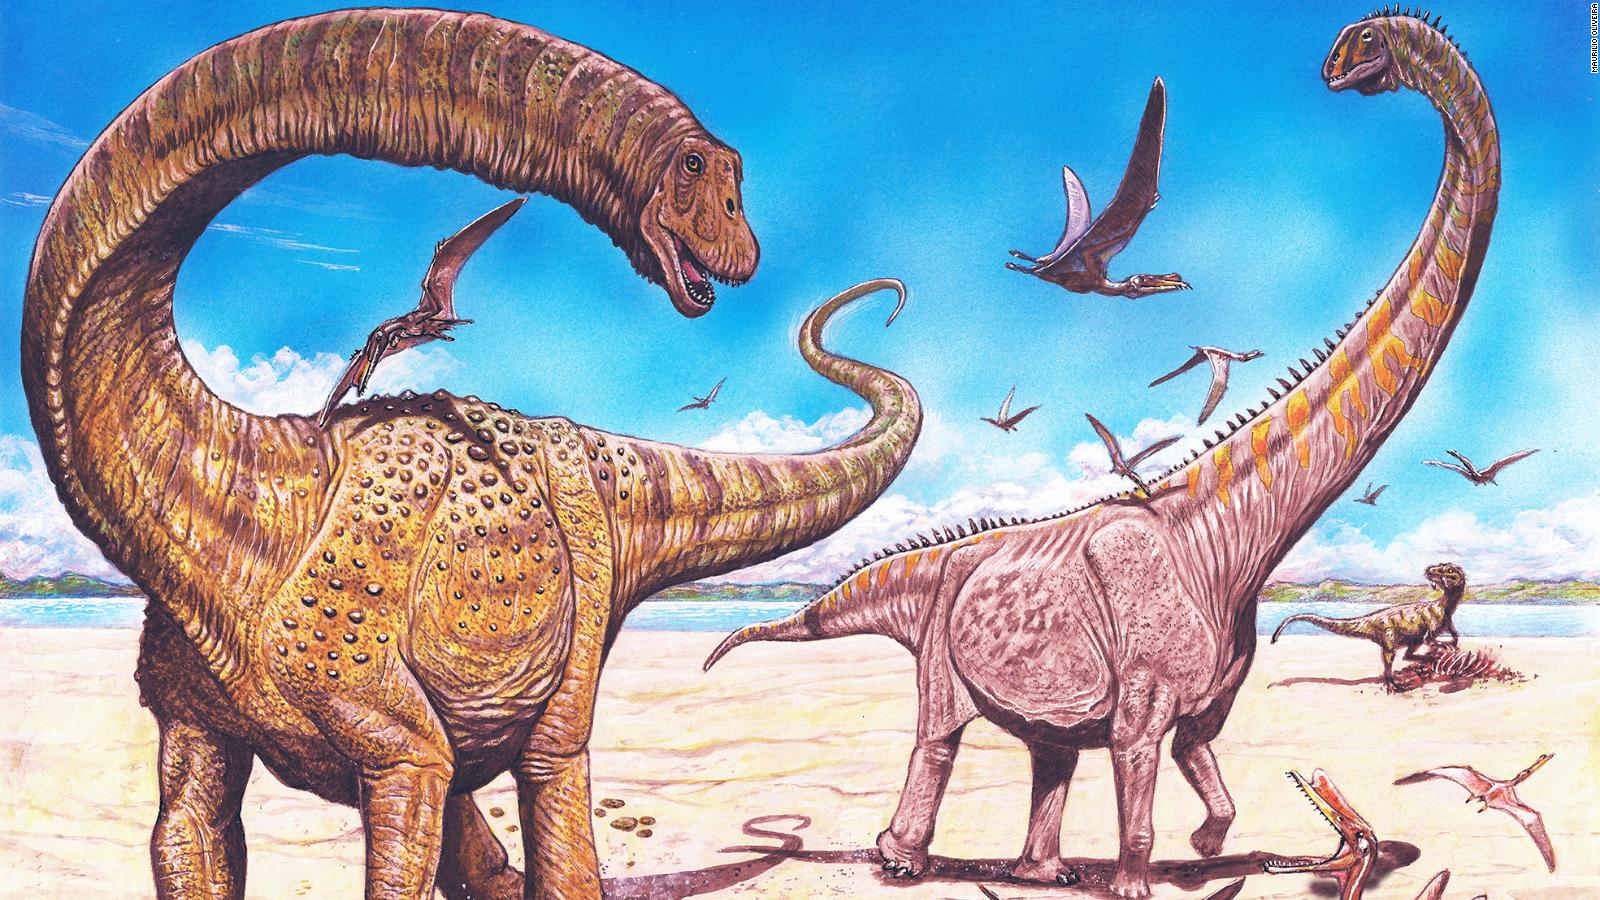 Two new dinosaur species, as big as a blue whale, discovered in China CNN